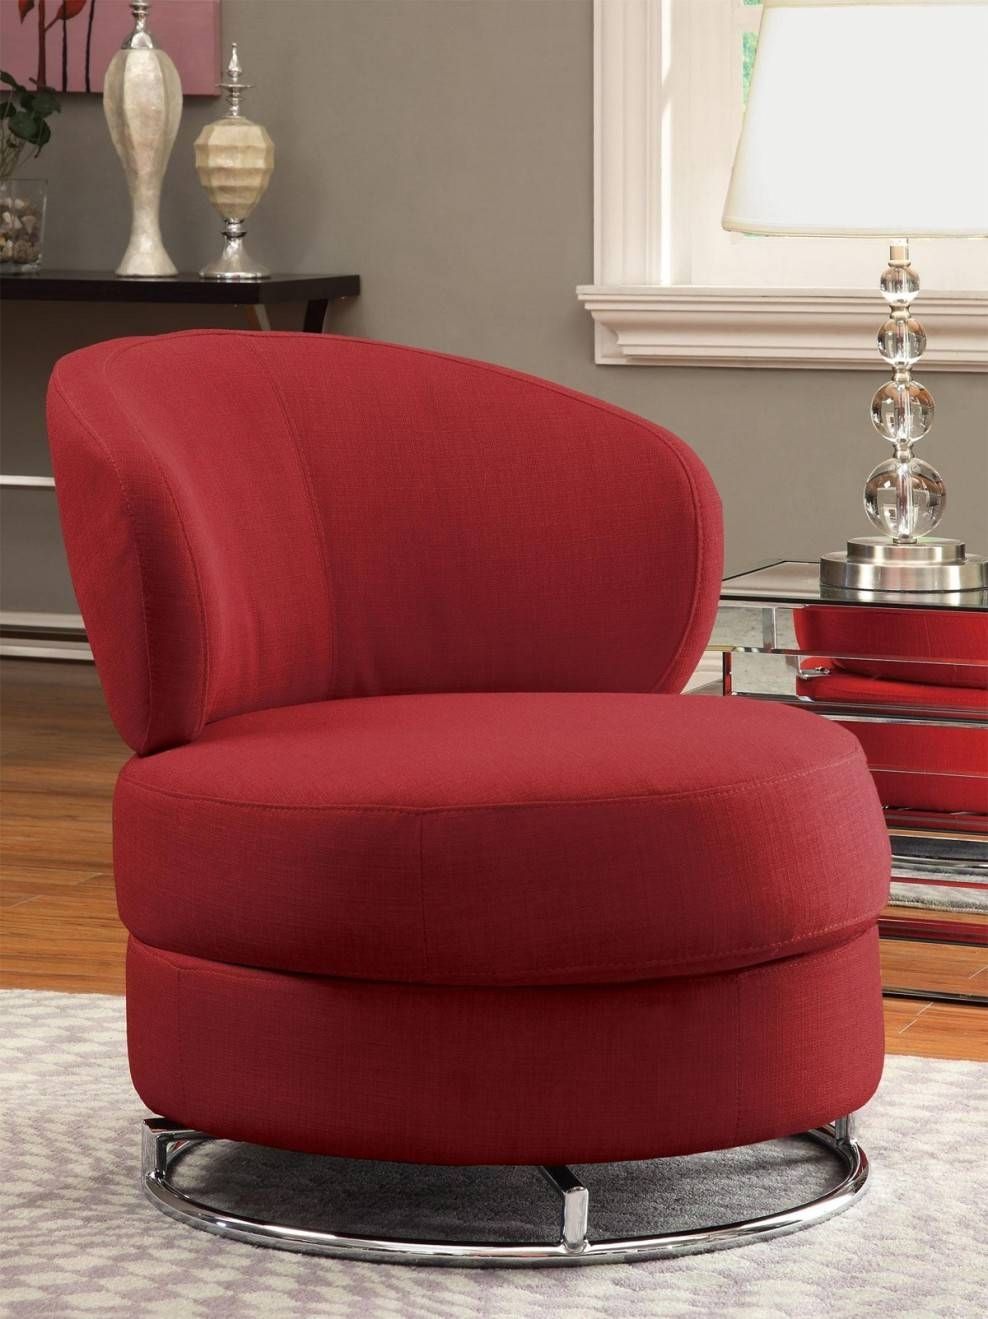 Round Living Room Chair Living Room Design And Living Room Ideas In Round Swivel Sofa Chairs (View 8 of 30)